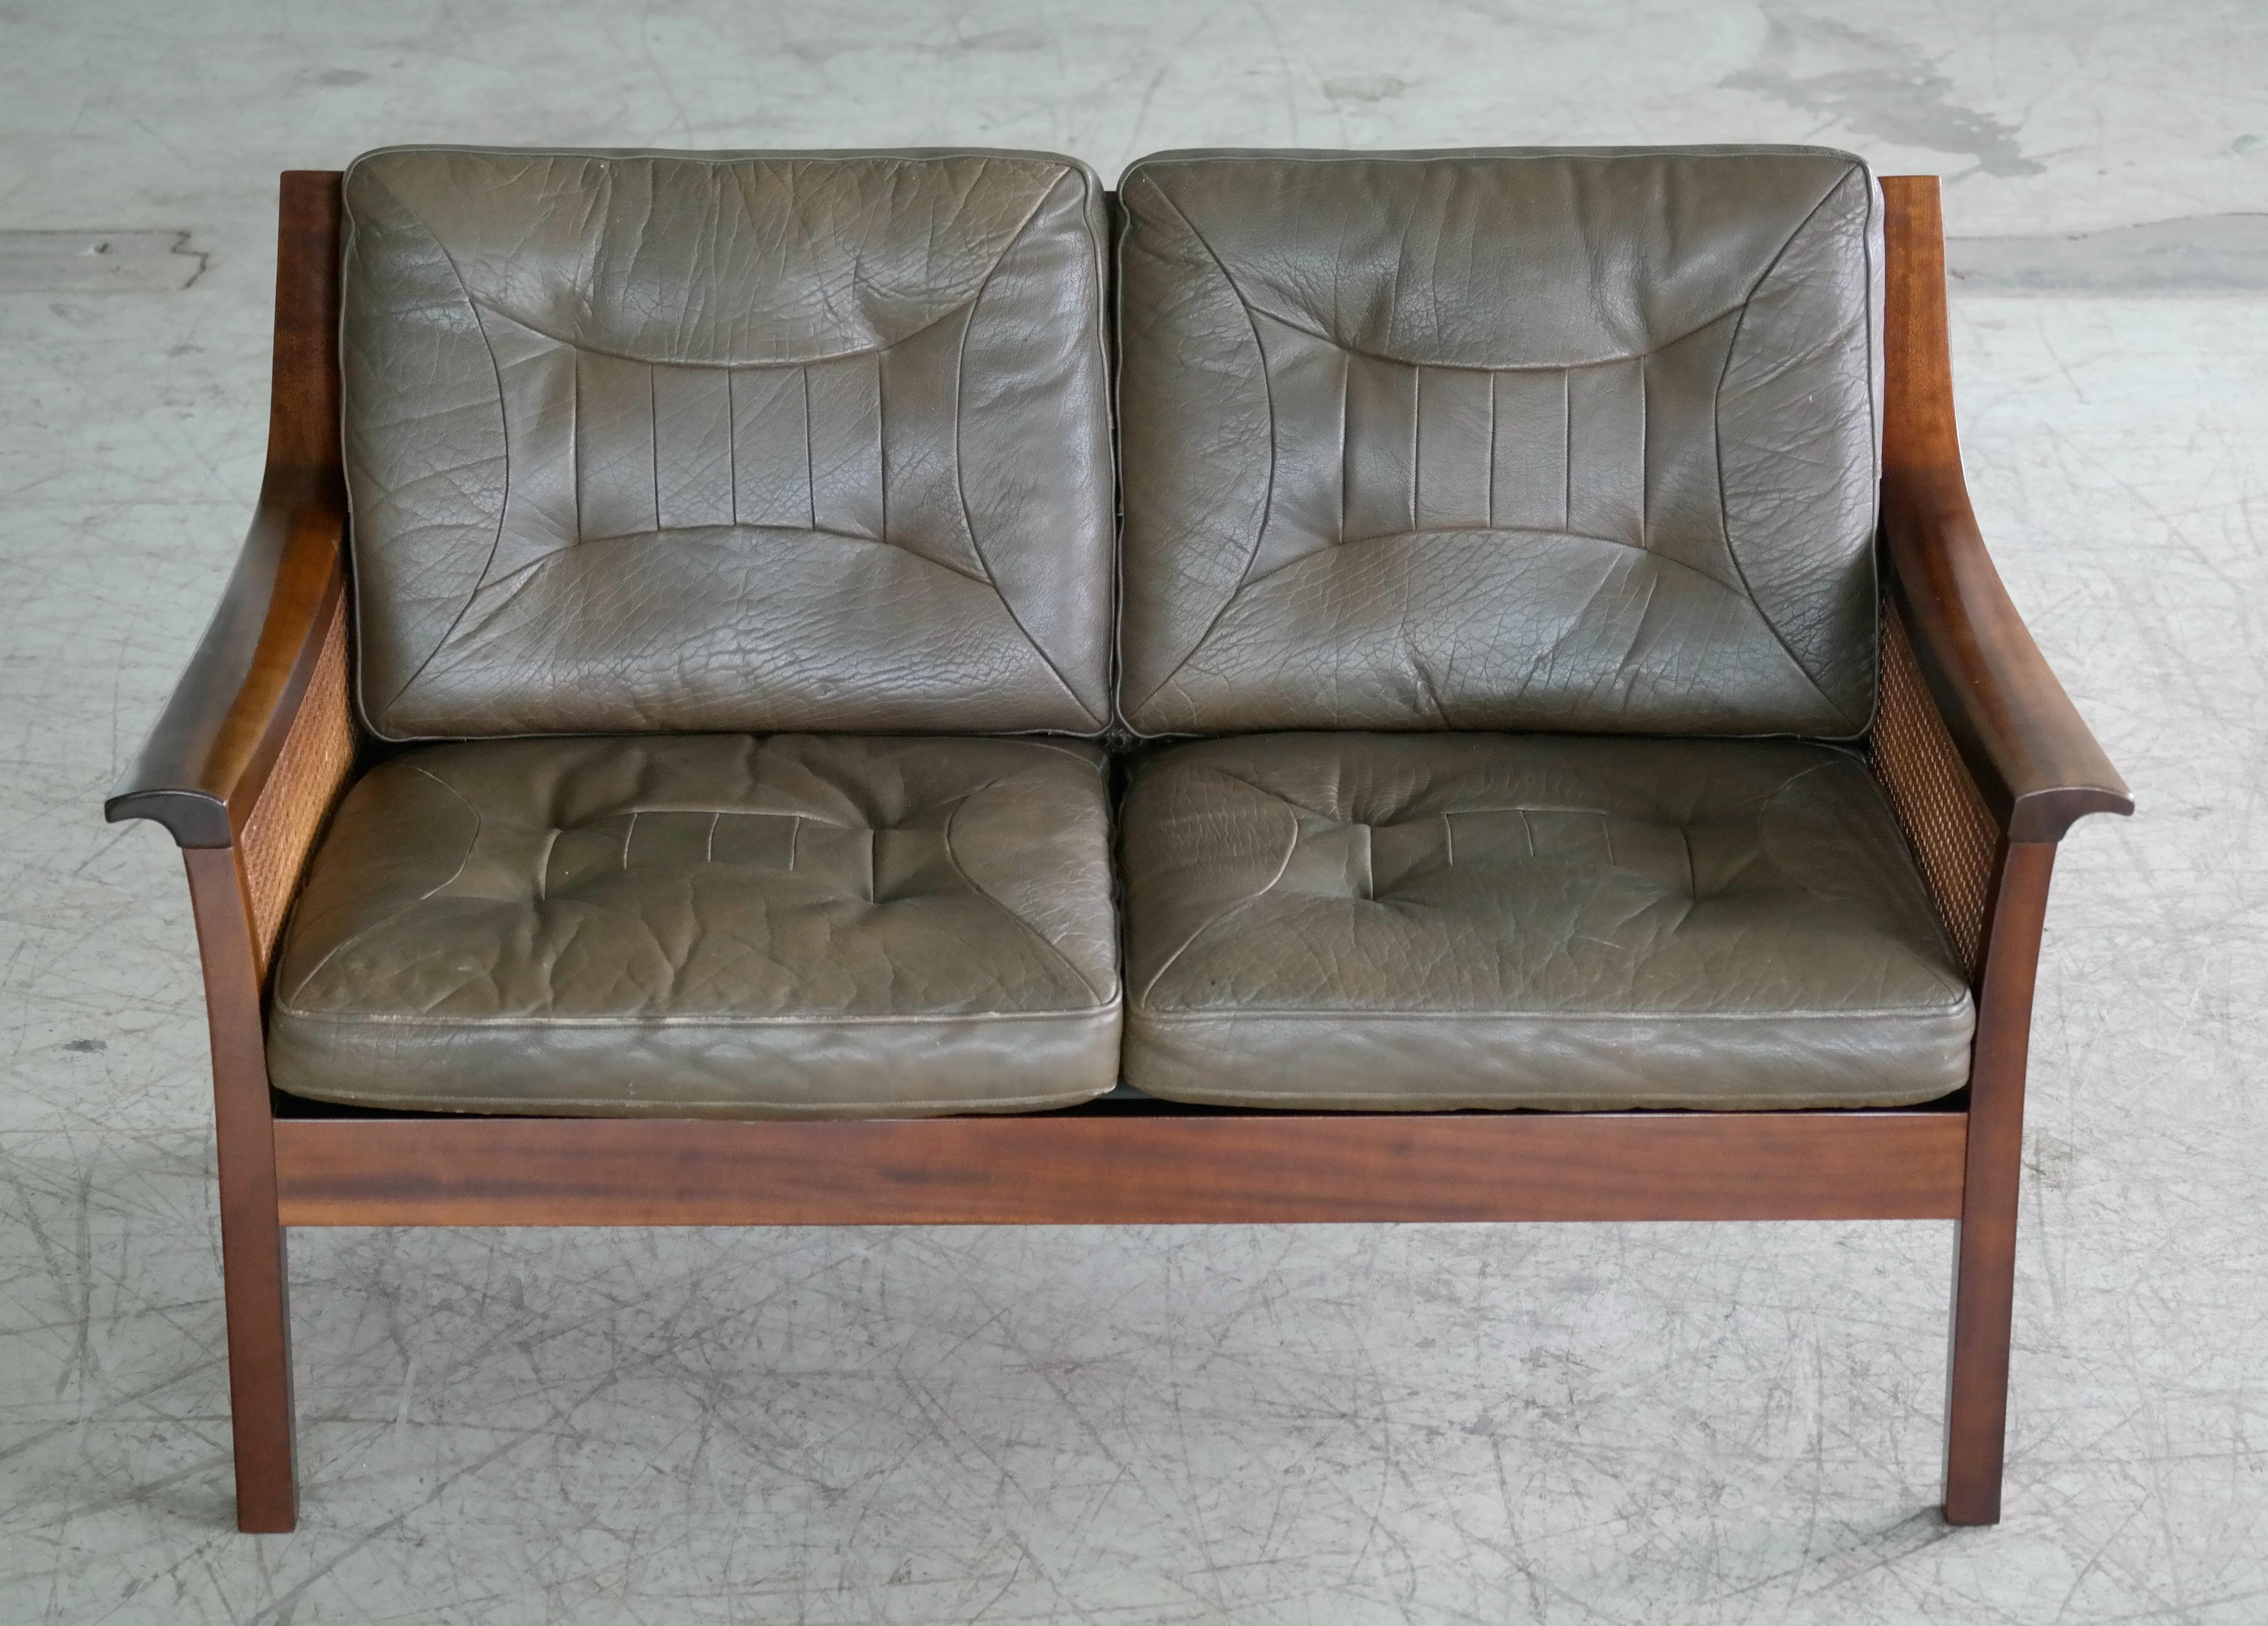 Beautiful Torbjorn Afdal designed sofa in stained beech with top grain olive colored leather cushions and woven double sided cane in the back and sides. Both cane, wood and leather show great patina throughout with only minor age appropriate wear